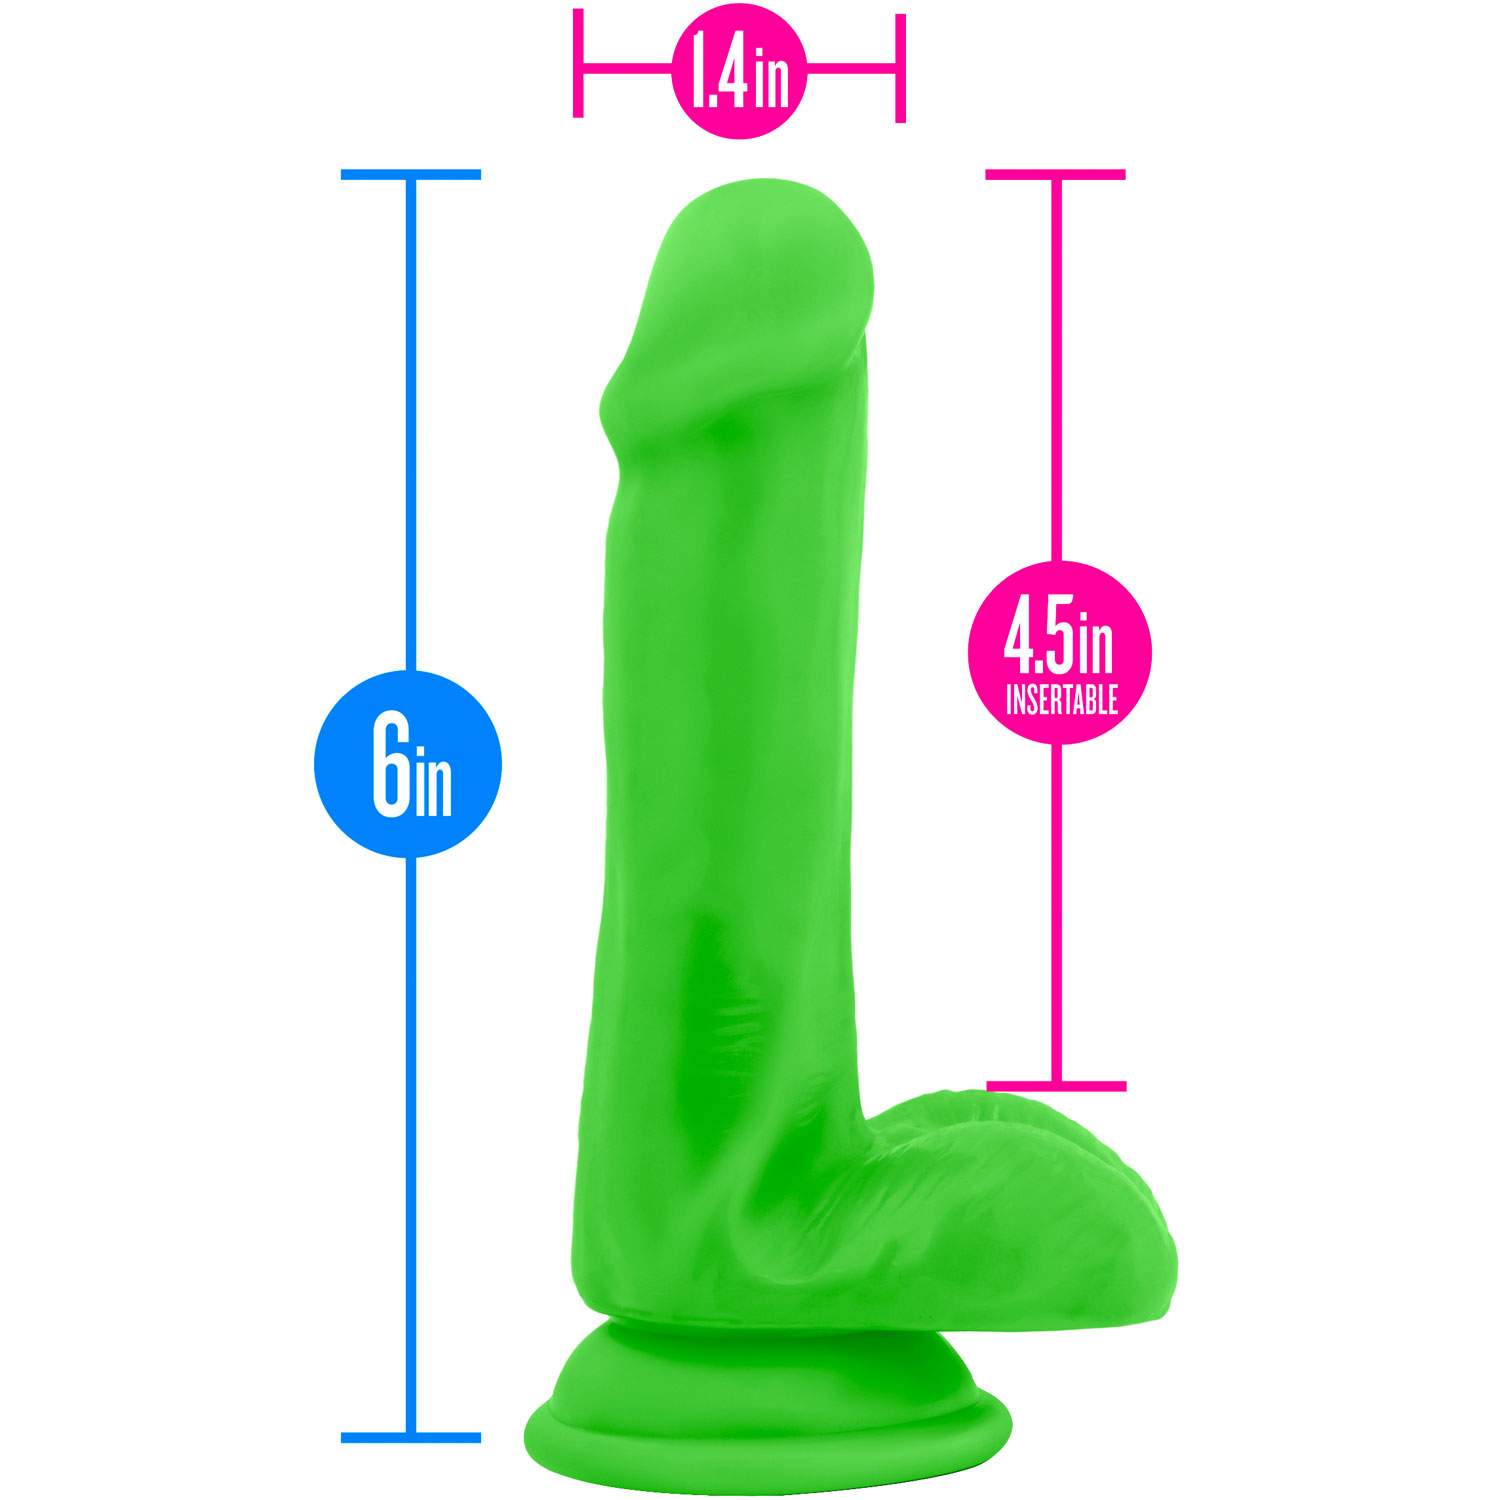 Neo Elite 6 Inch Dual Density Realistic Silicone Dildo With Balls by Blush - Measurements